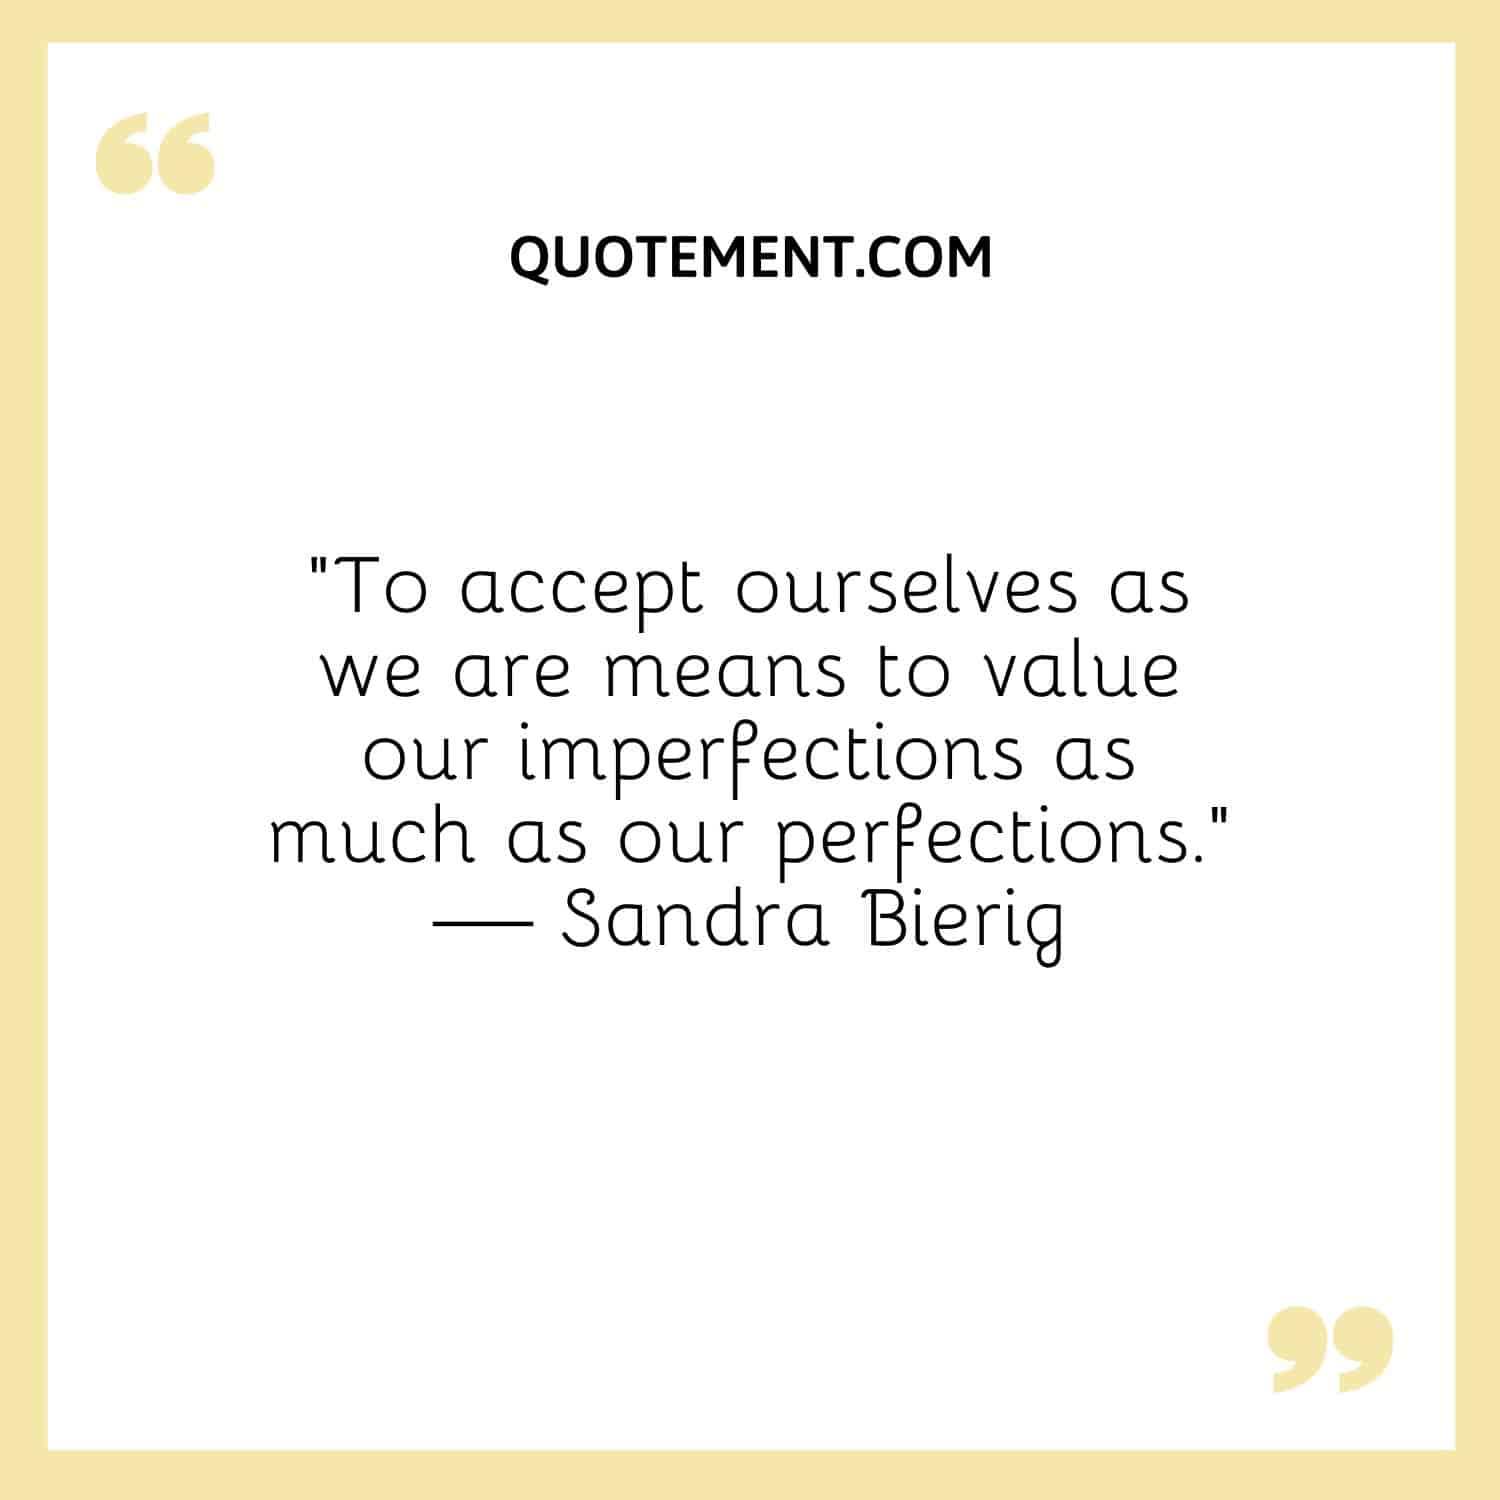 To accept ourselves as we are means to value our imperfections as much as our perfections